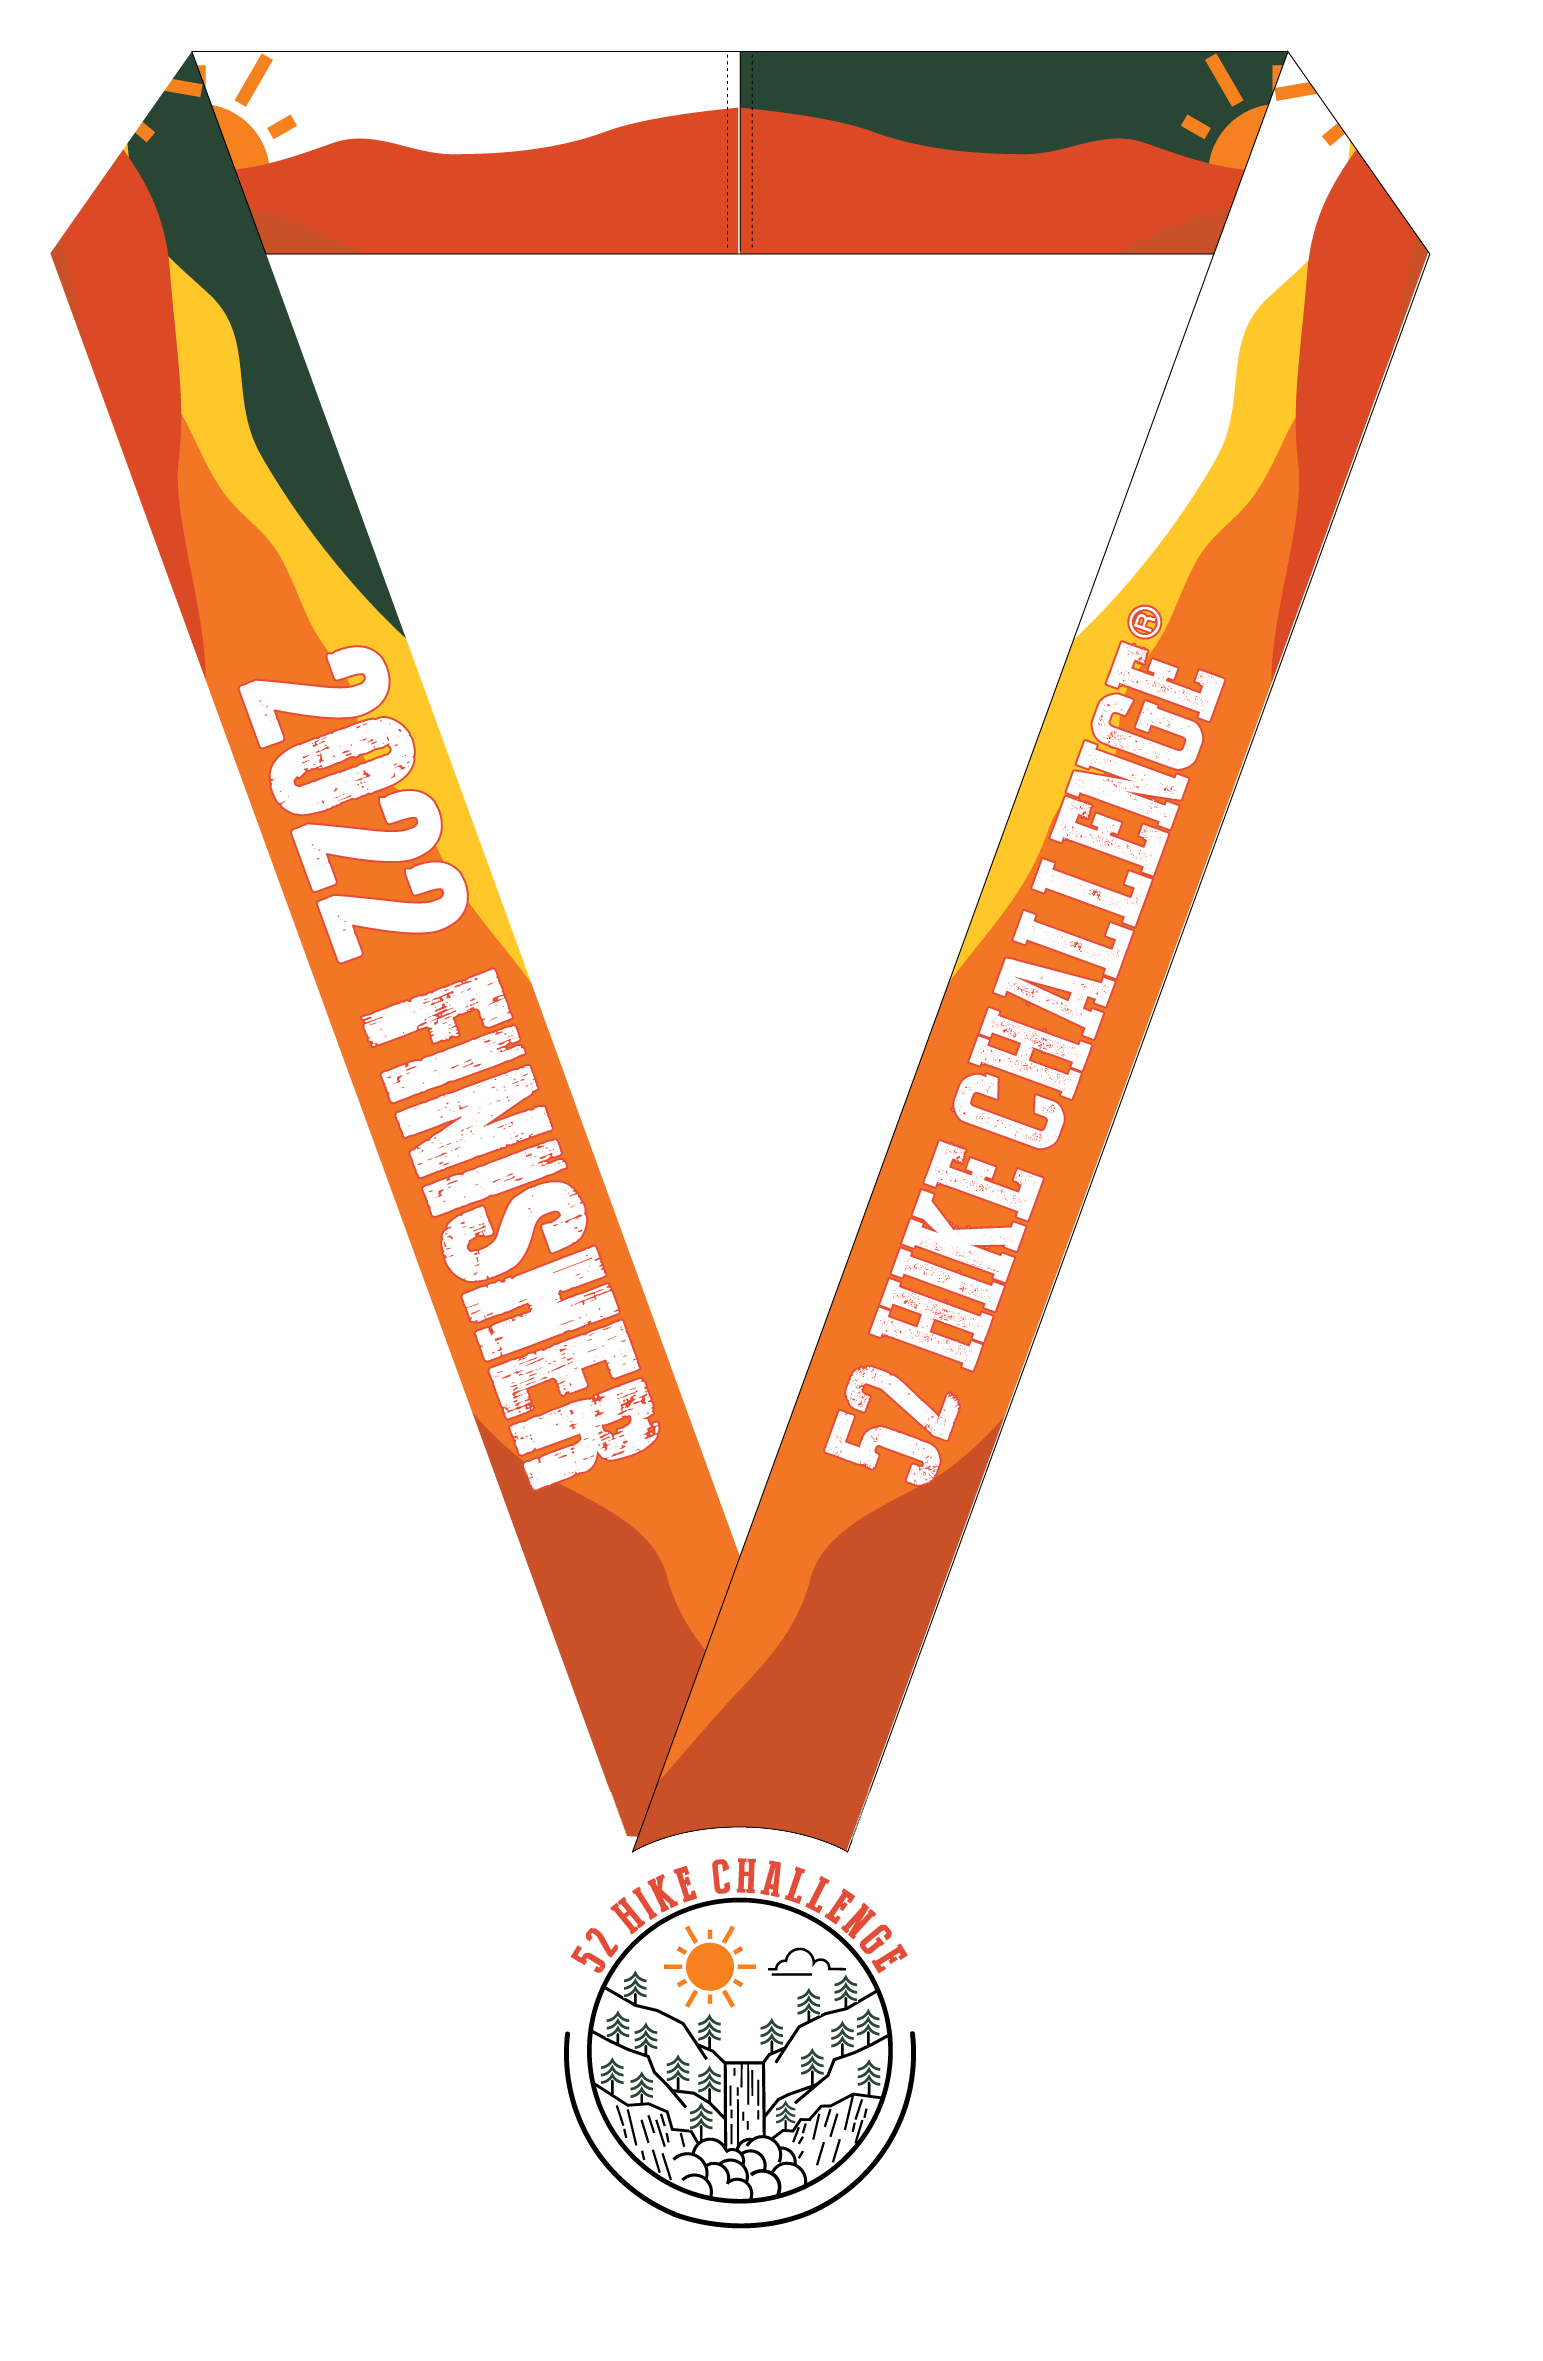 2022 Finisher Medal & Coupon Pack